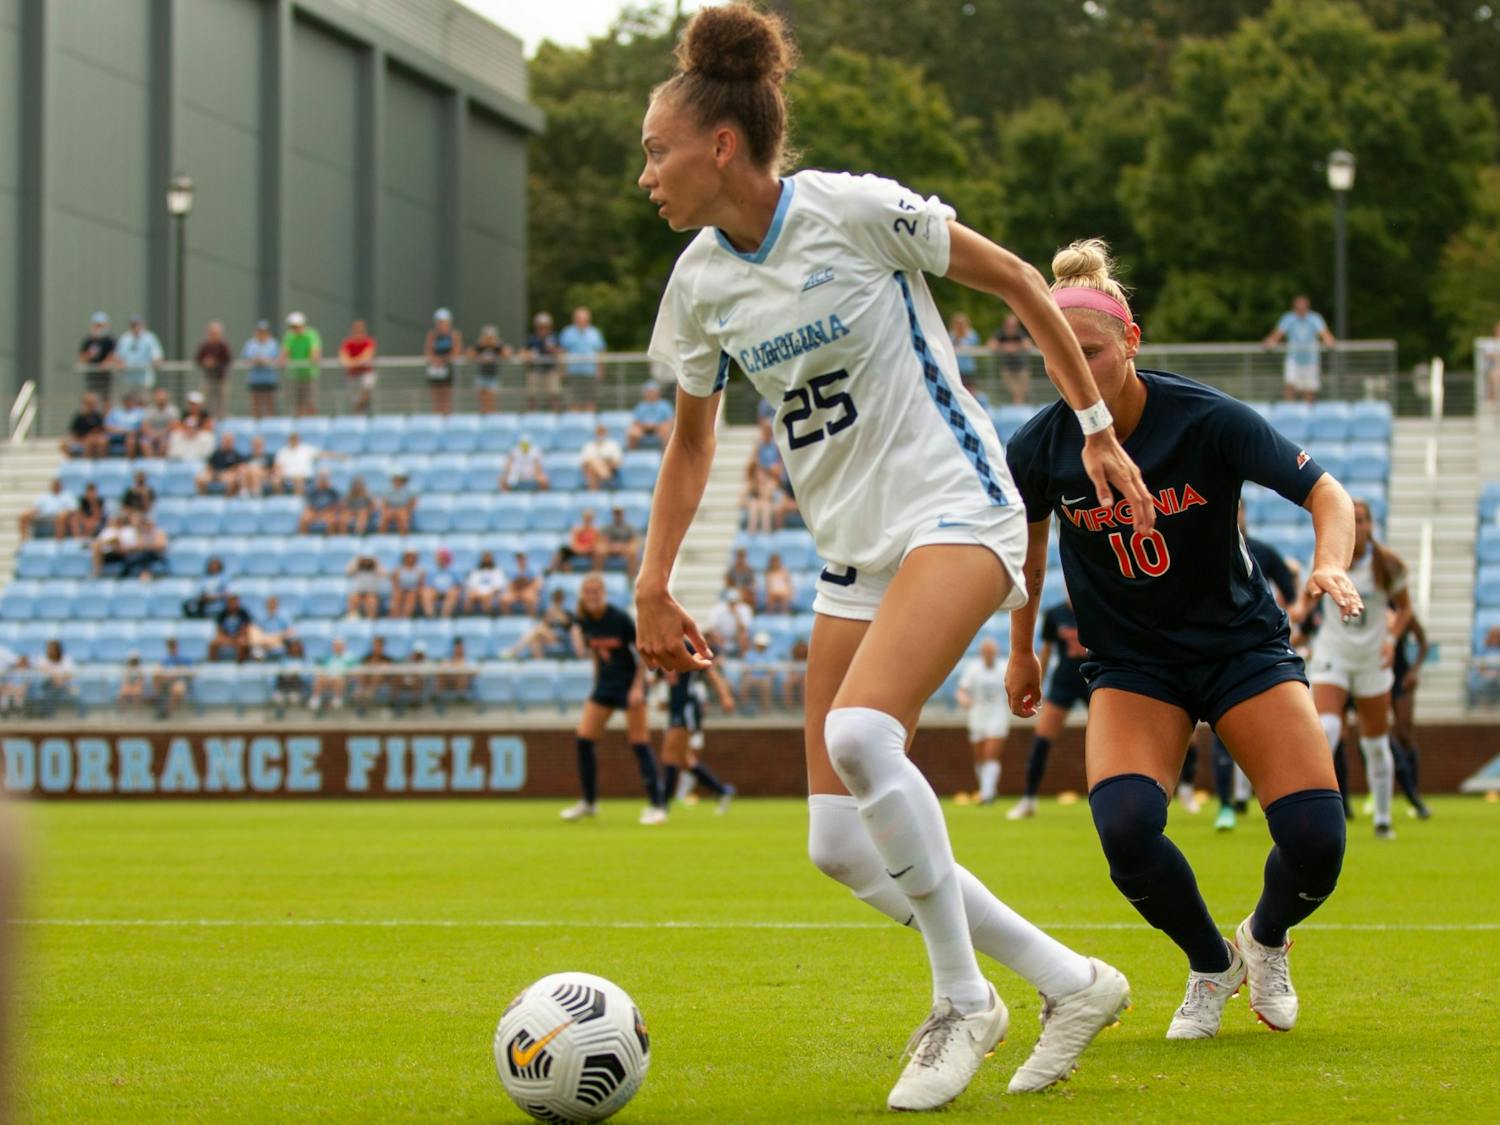 Junior defender Maycee Bell (25) dribbles the ball at the game against Virginia on Oct. 3 at Dorrance Field. UNC tied 0-0.